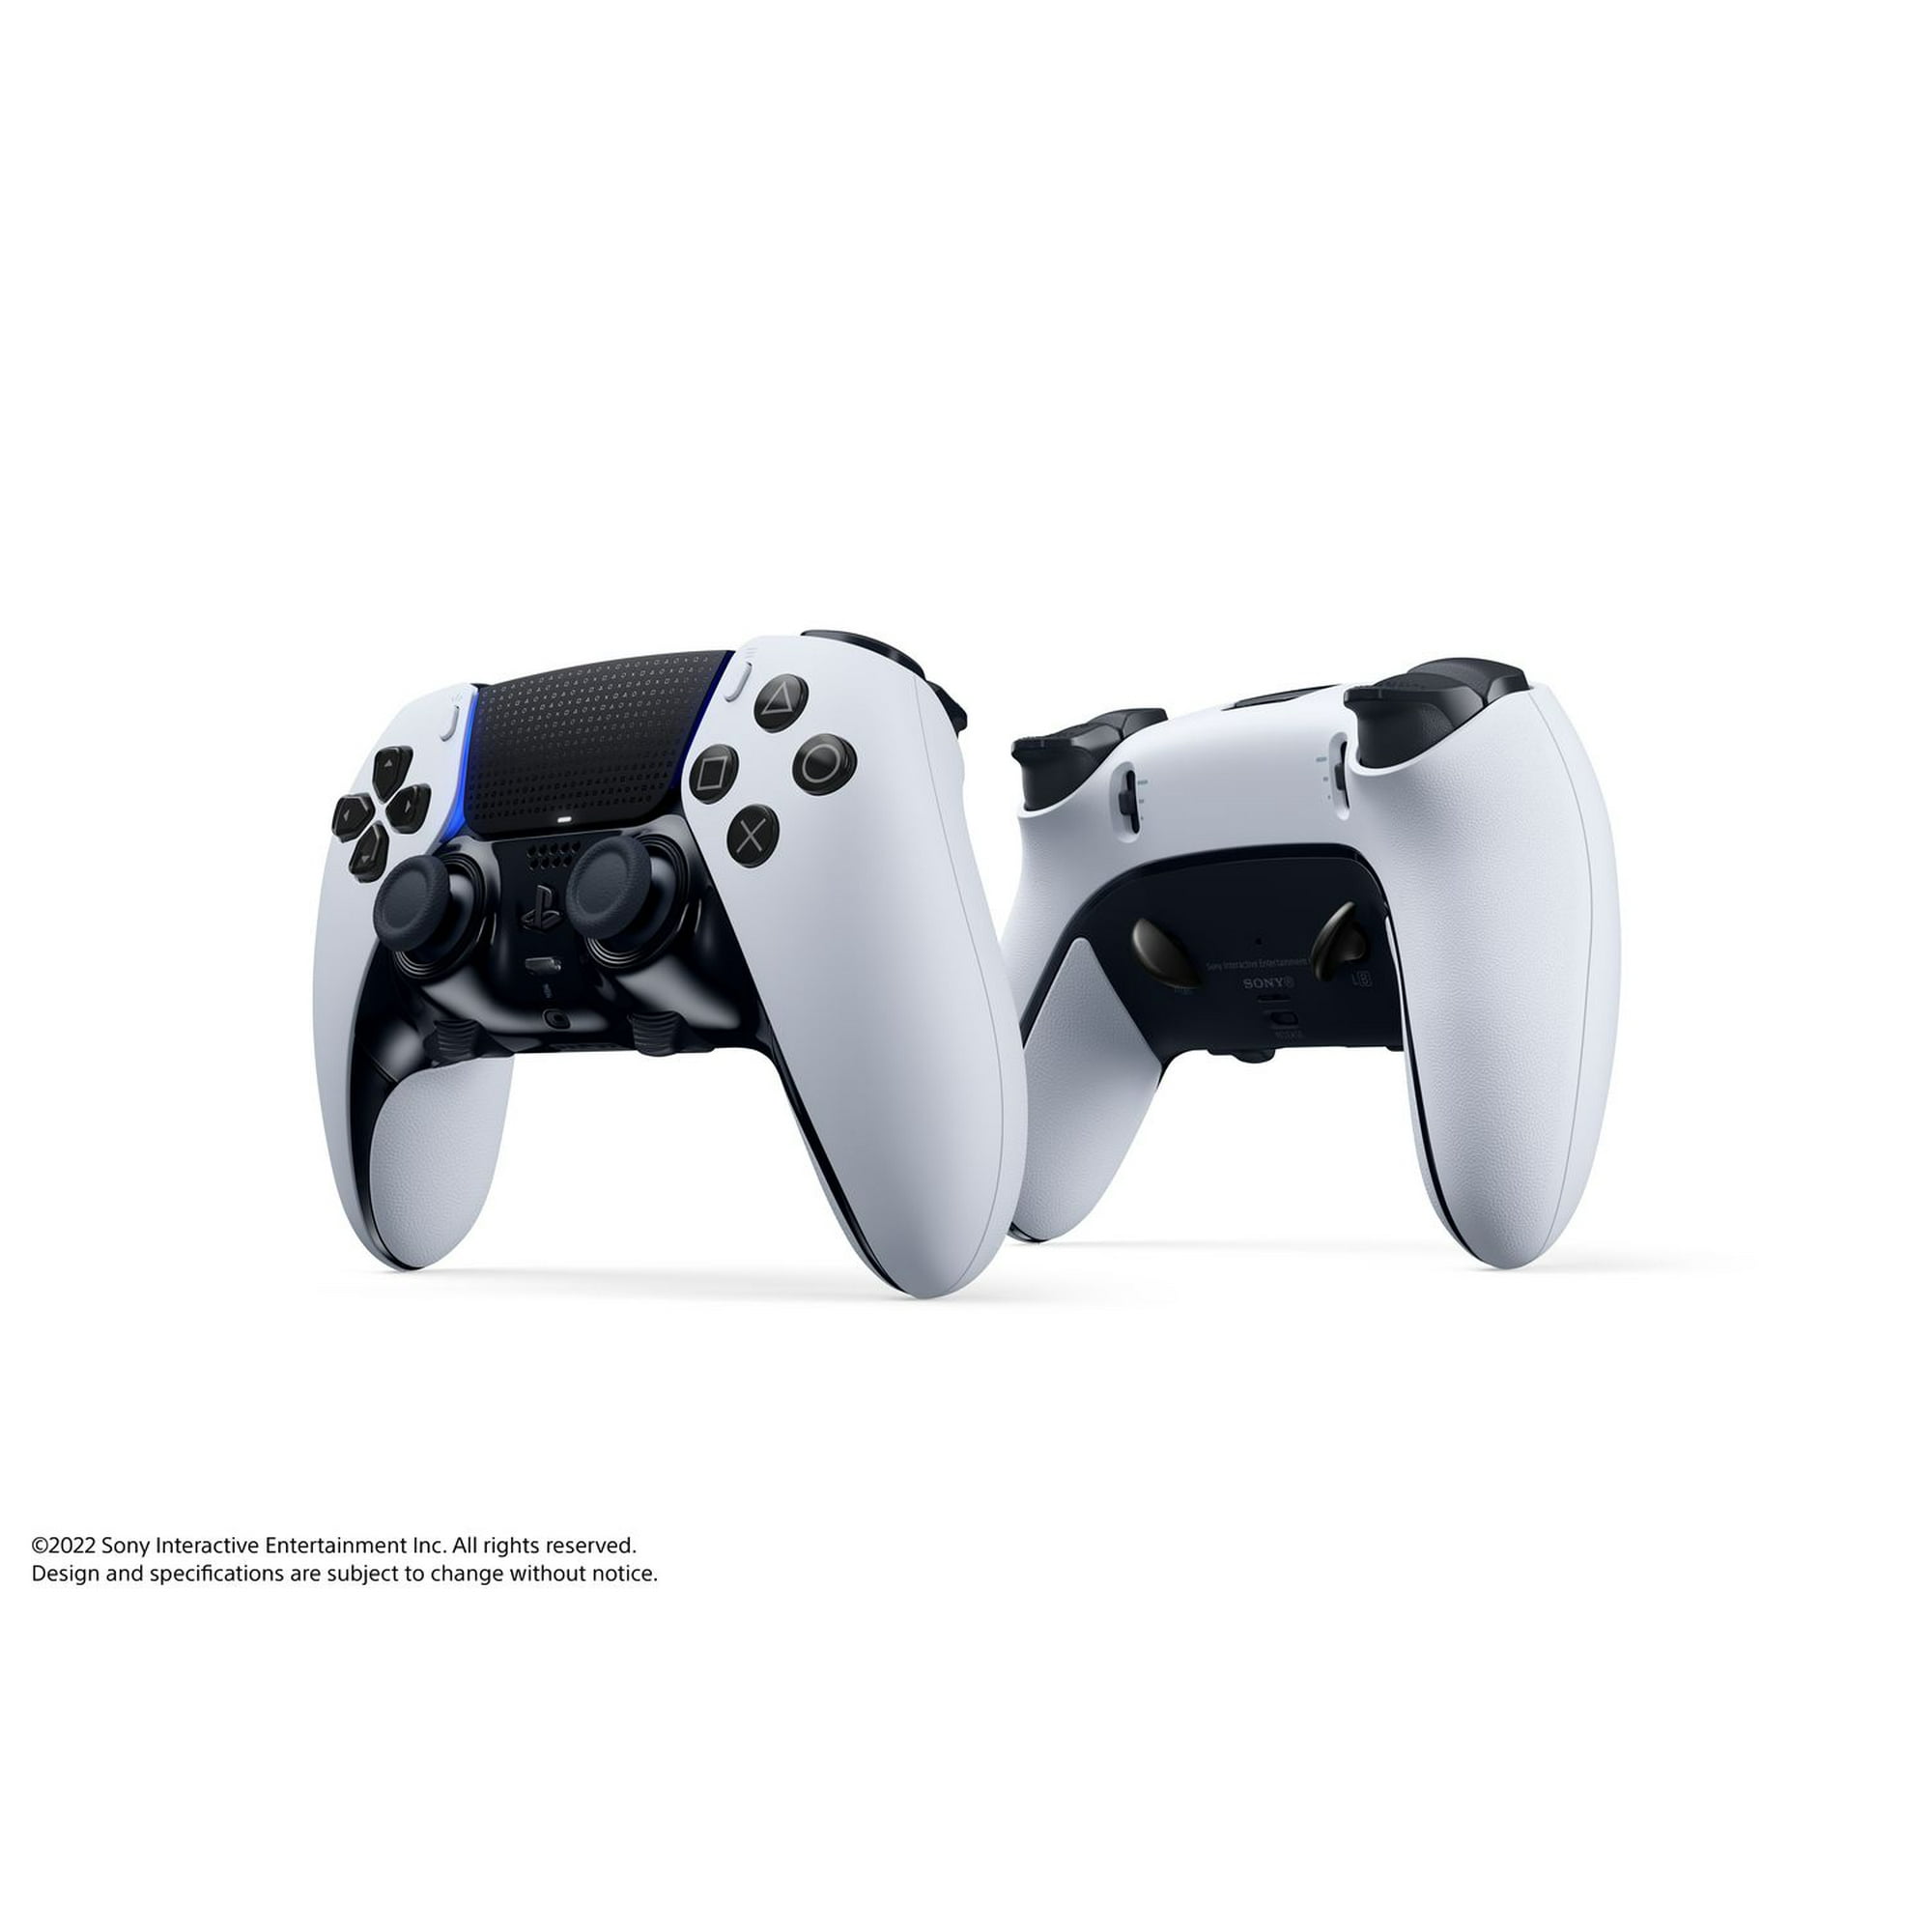 PlayStation®5 DualSense Edge™ Wireless Controller, Perfect Your Gameplay™ 